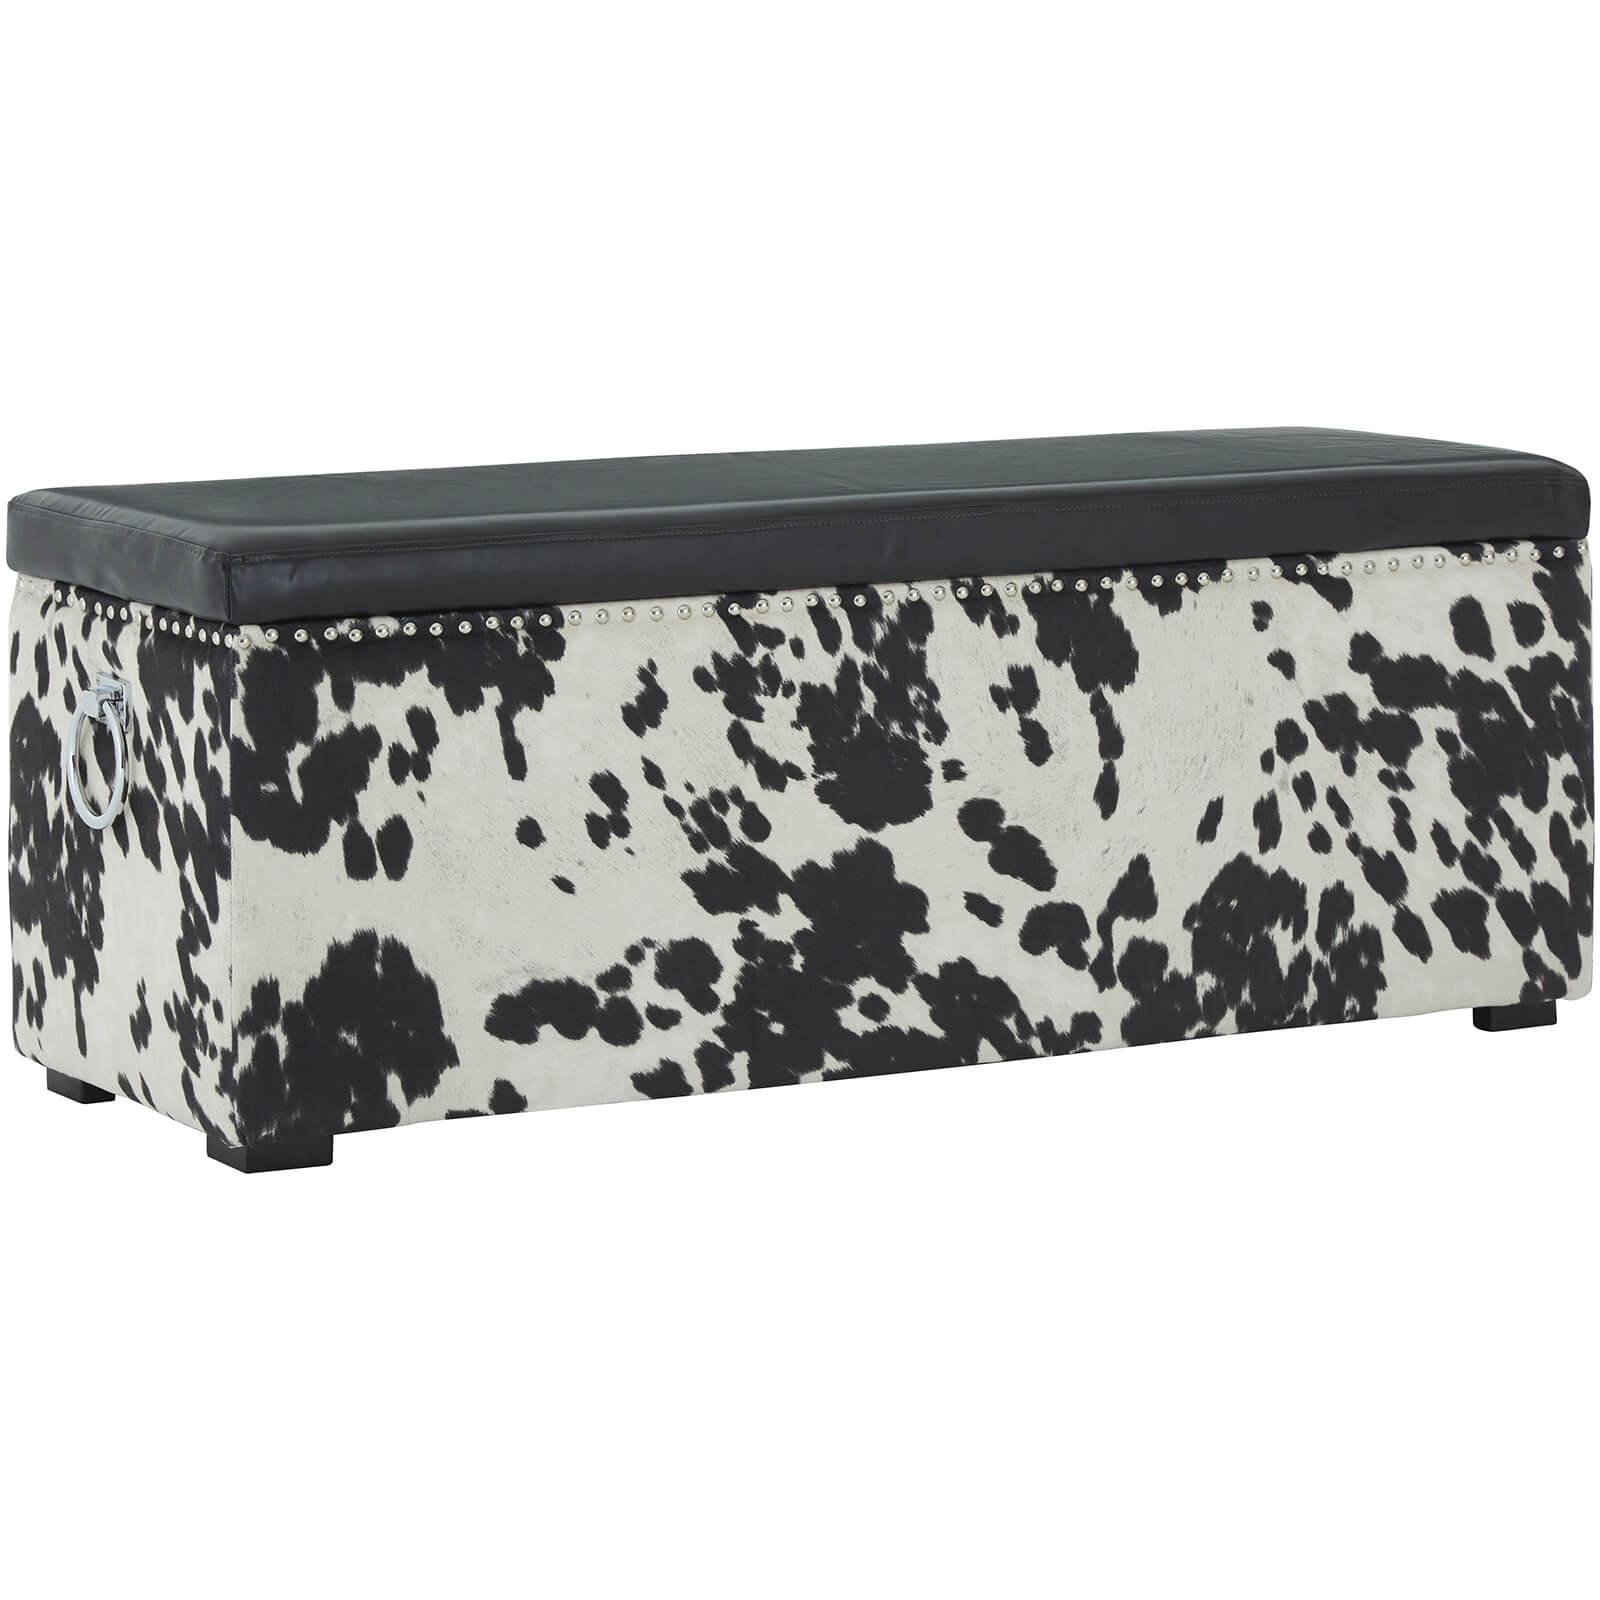 Fifty Five South Rodeo Storage Black Leather Effect Bench Black